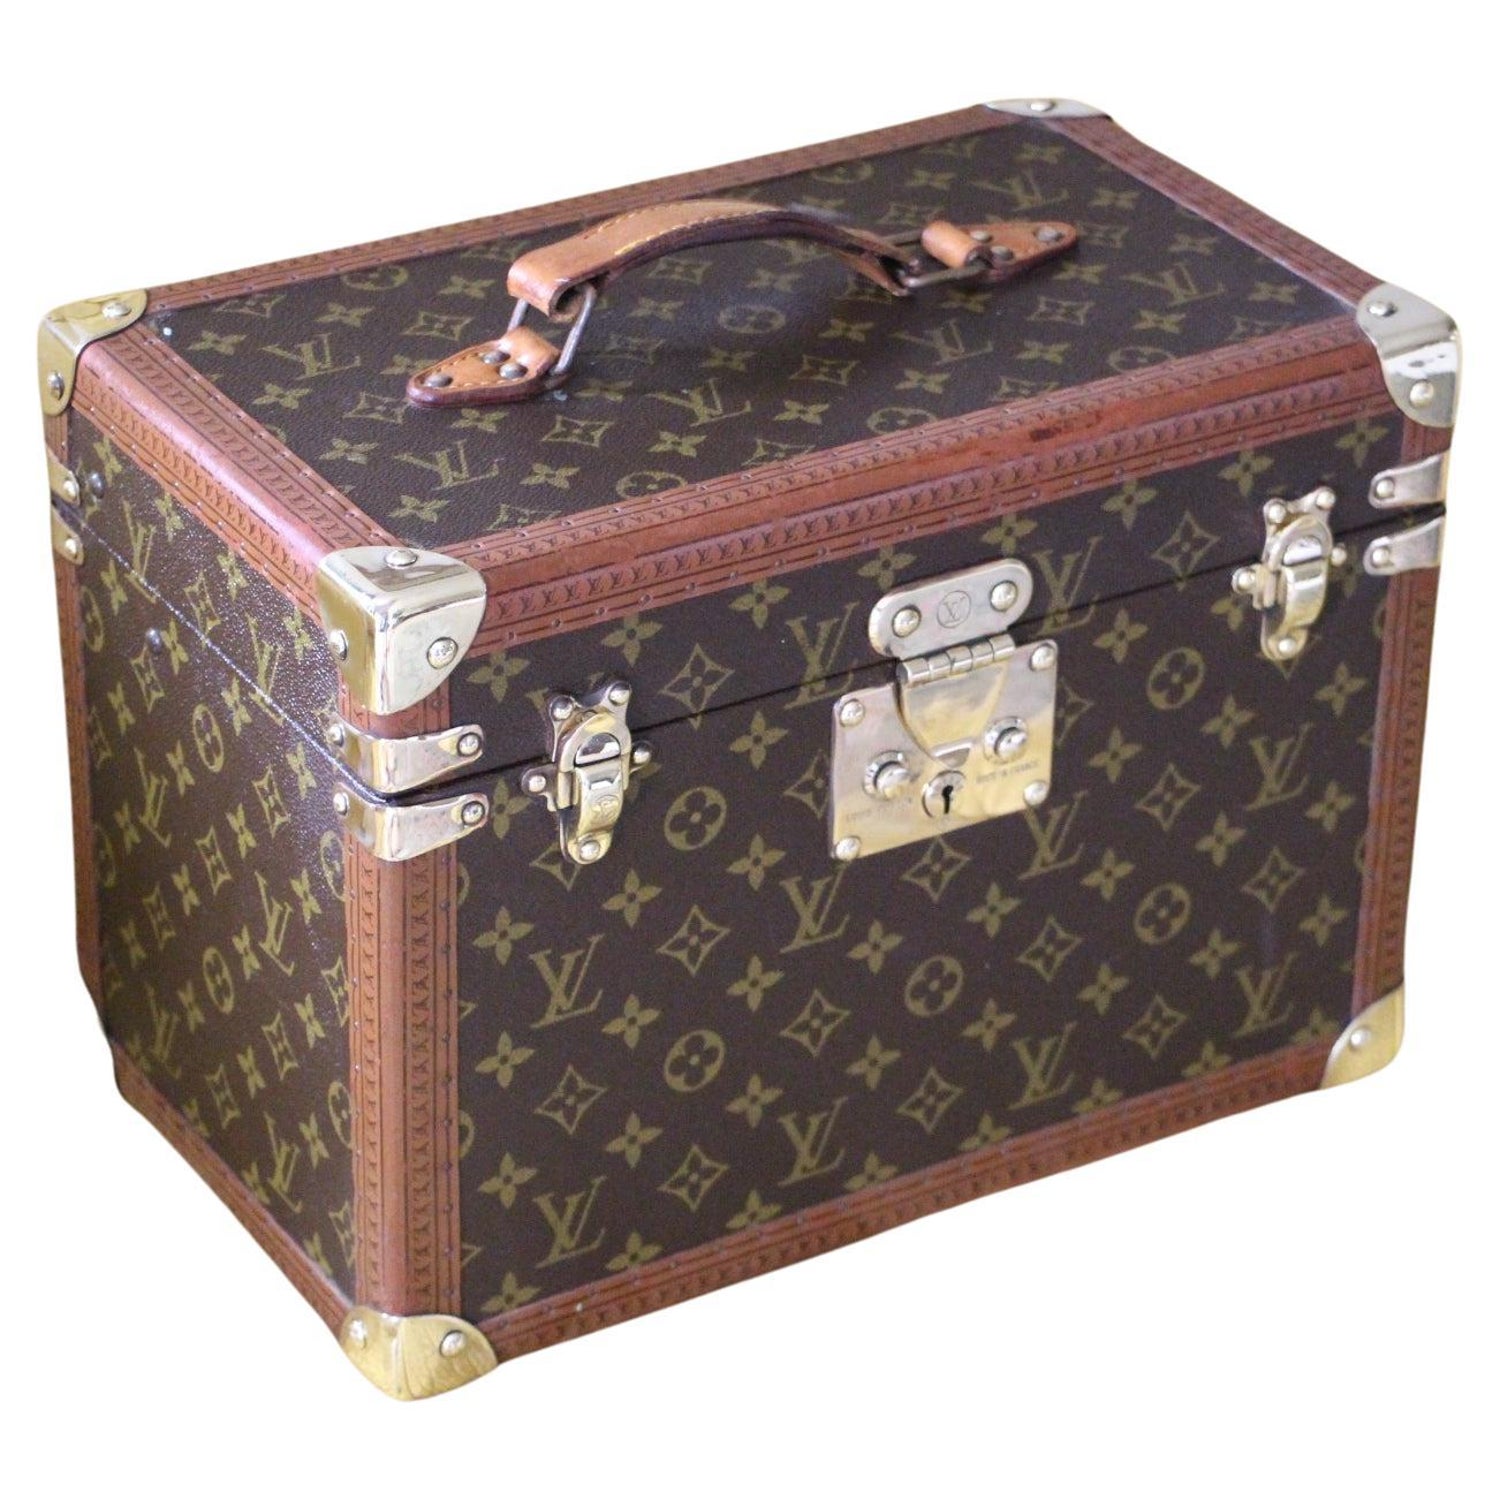 Louis Vuitton launches bespoke fragrances housed in travel trunks